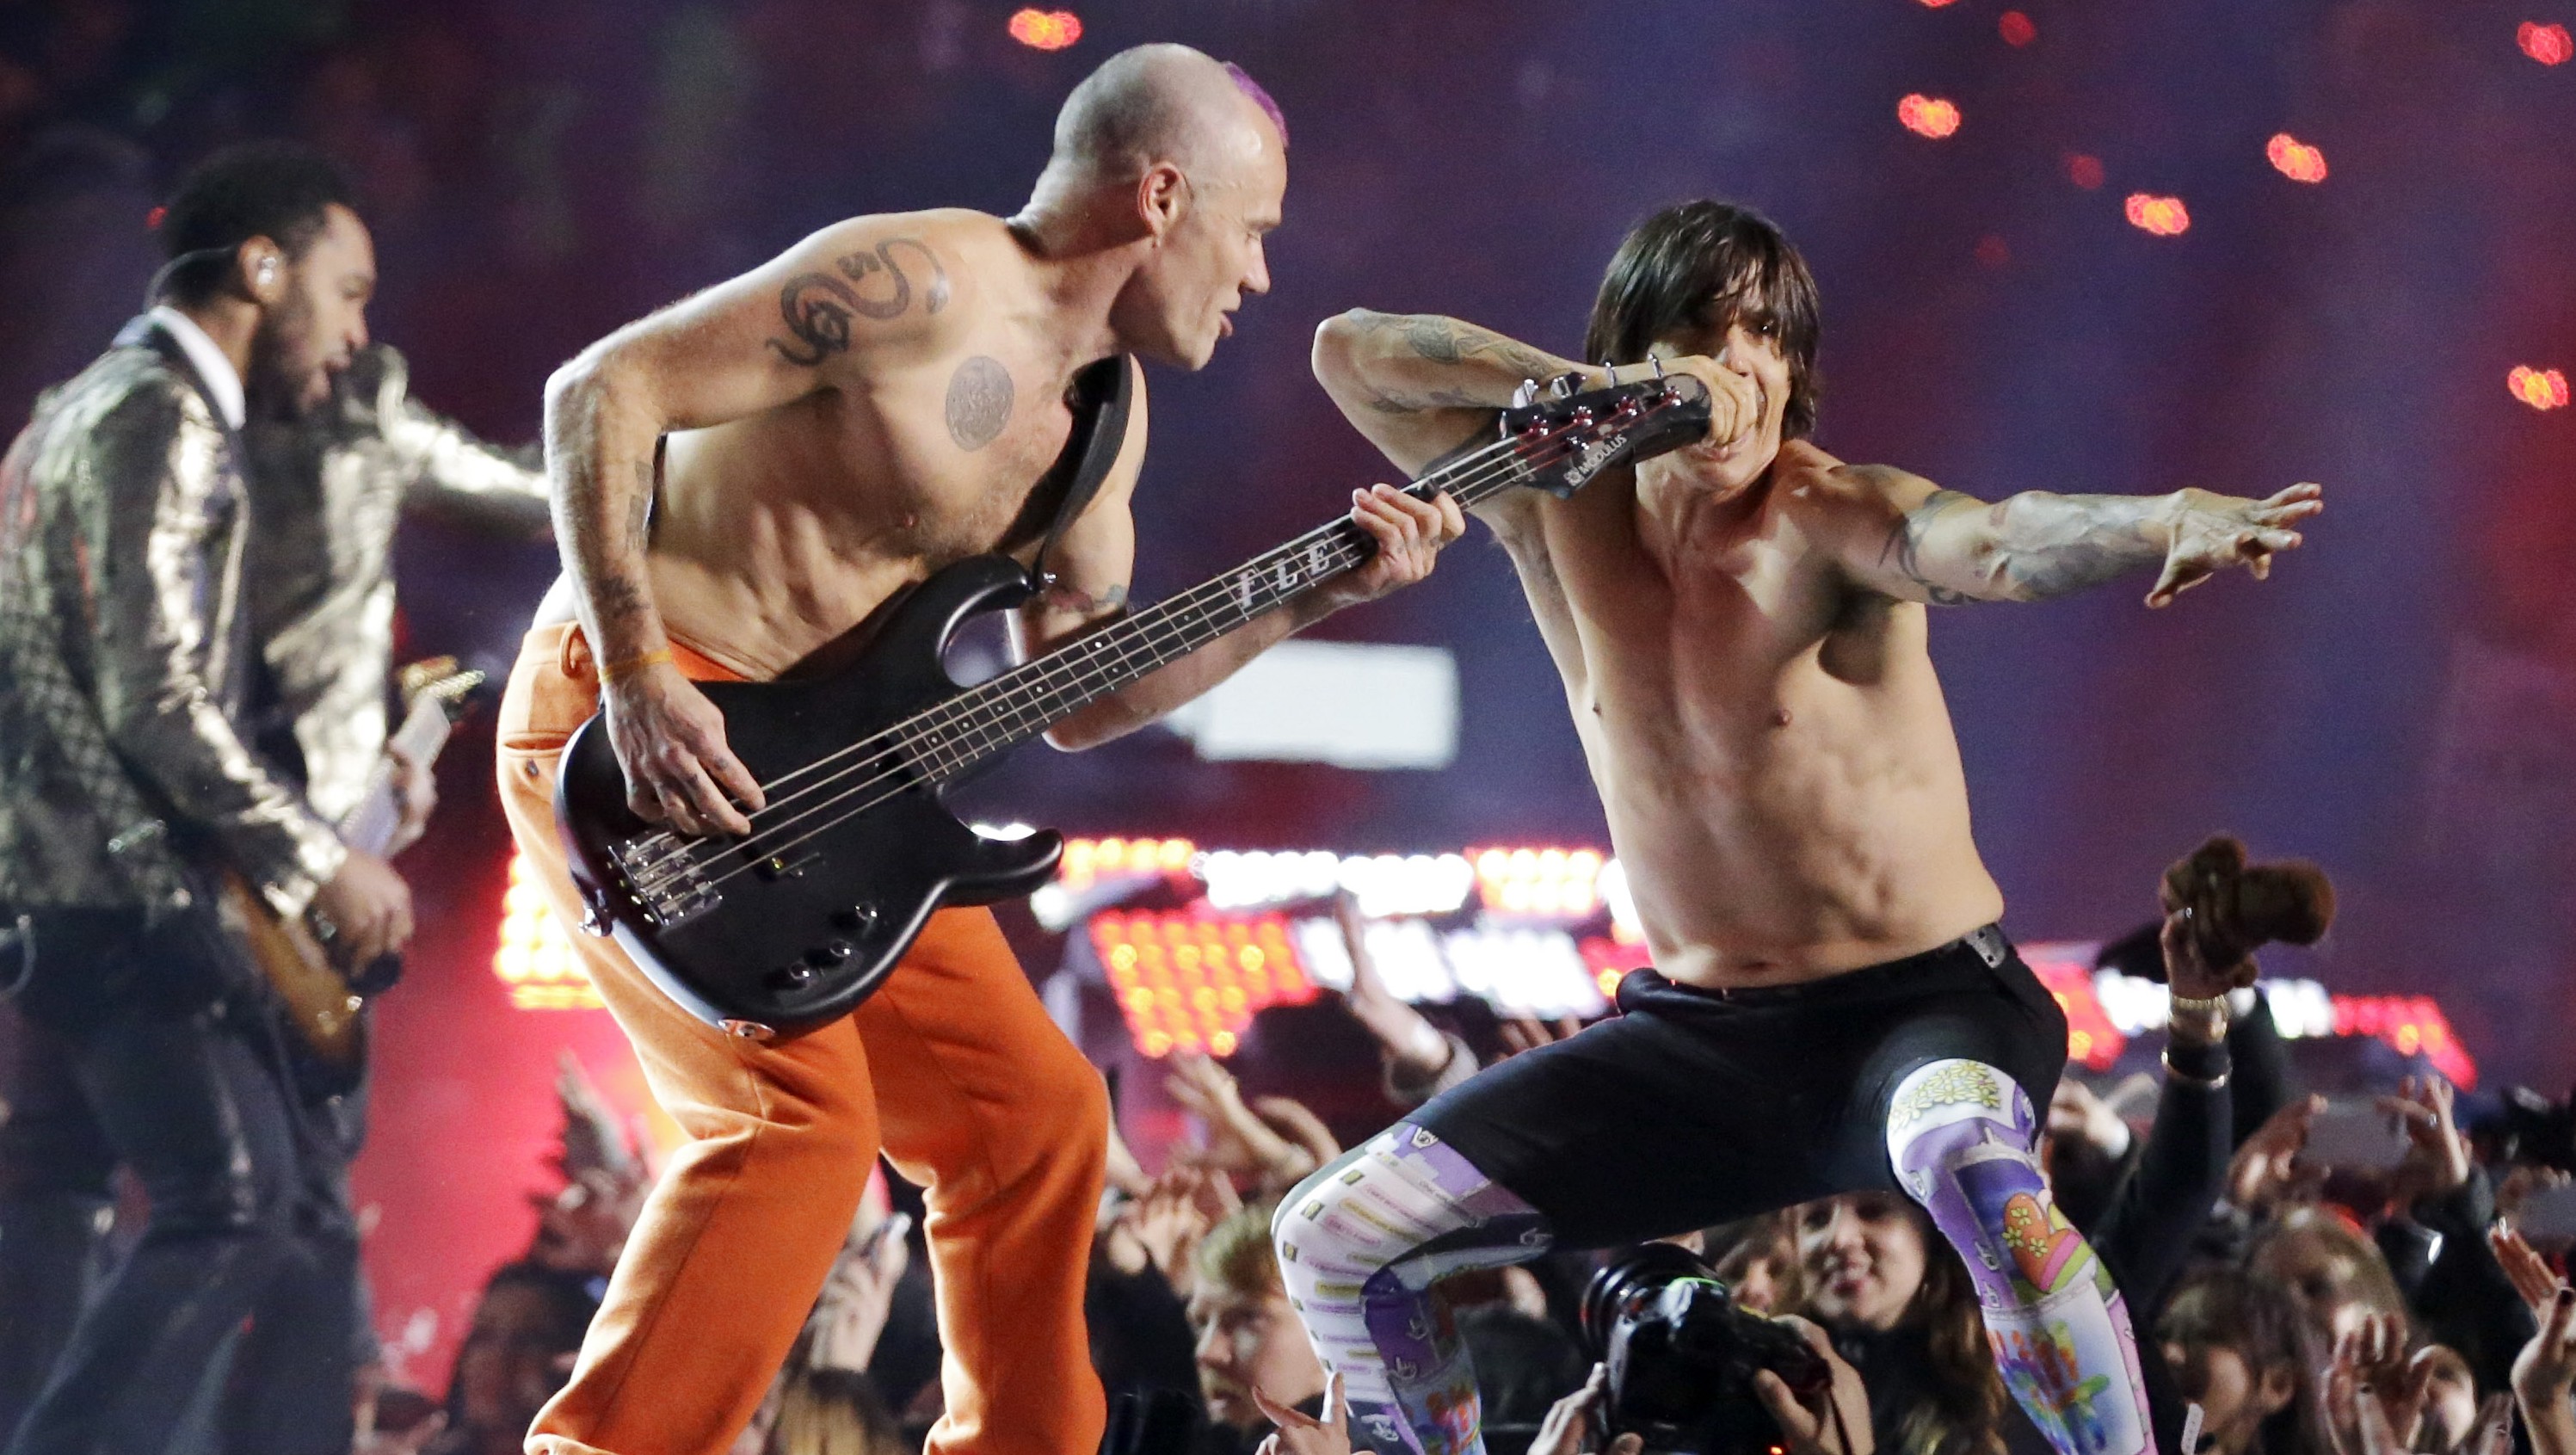 red hot chili peppers 2017 tour italia